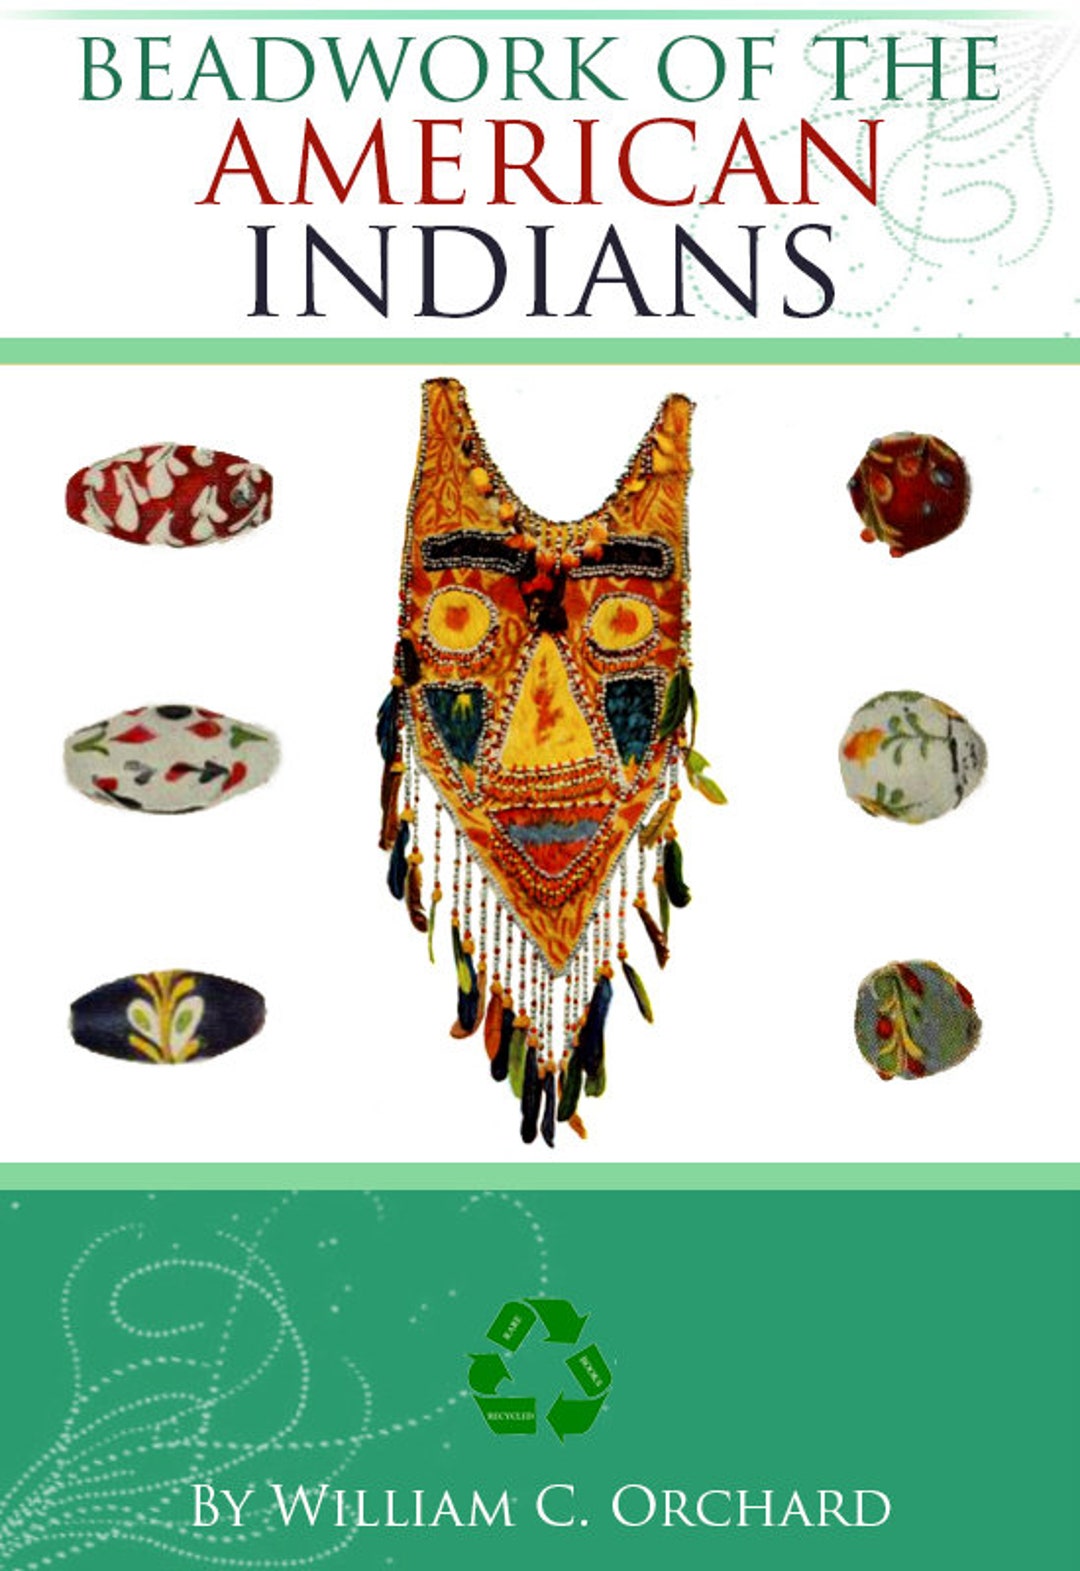 Xxvi Xxvii Xxxx Roum Sex - BEADWORK of the AMERICAN INDIANS Rare Illustrated Reference Book Based on  Specimens 169pgs Printable or Read on Your Tablet Instant Download - Etsy  Australia